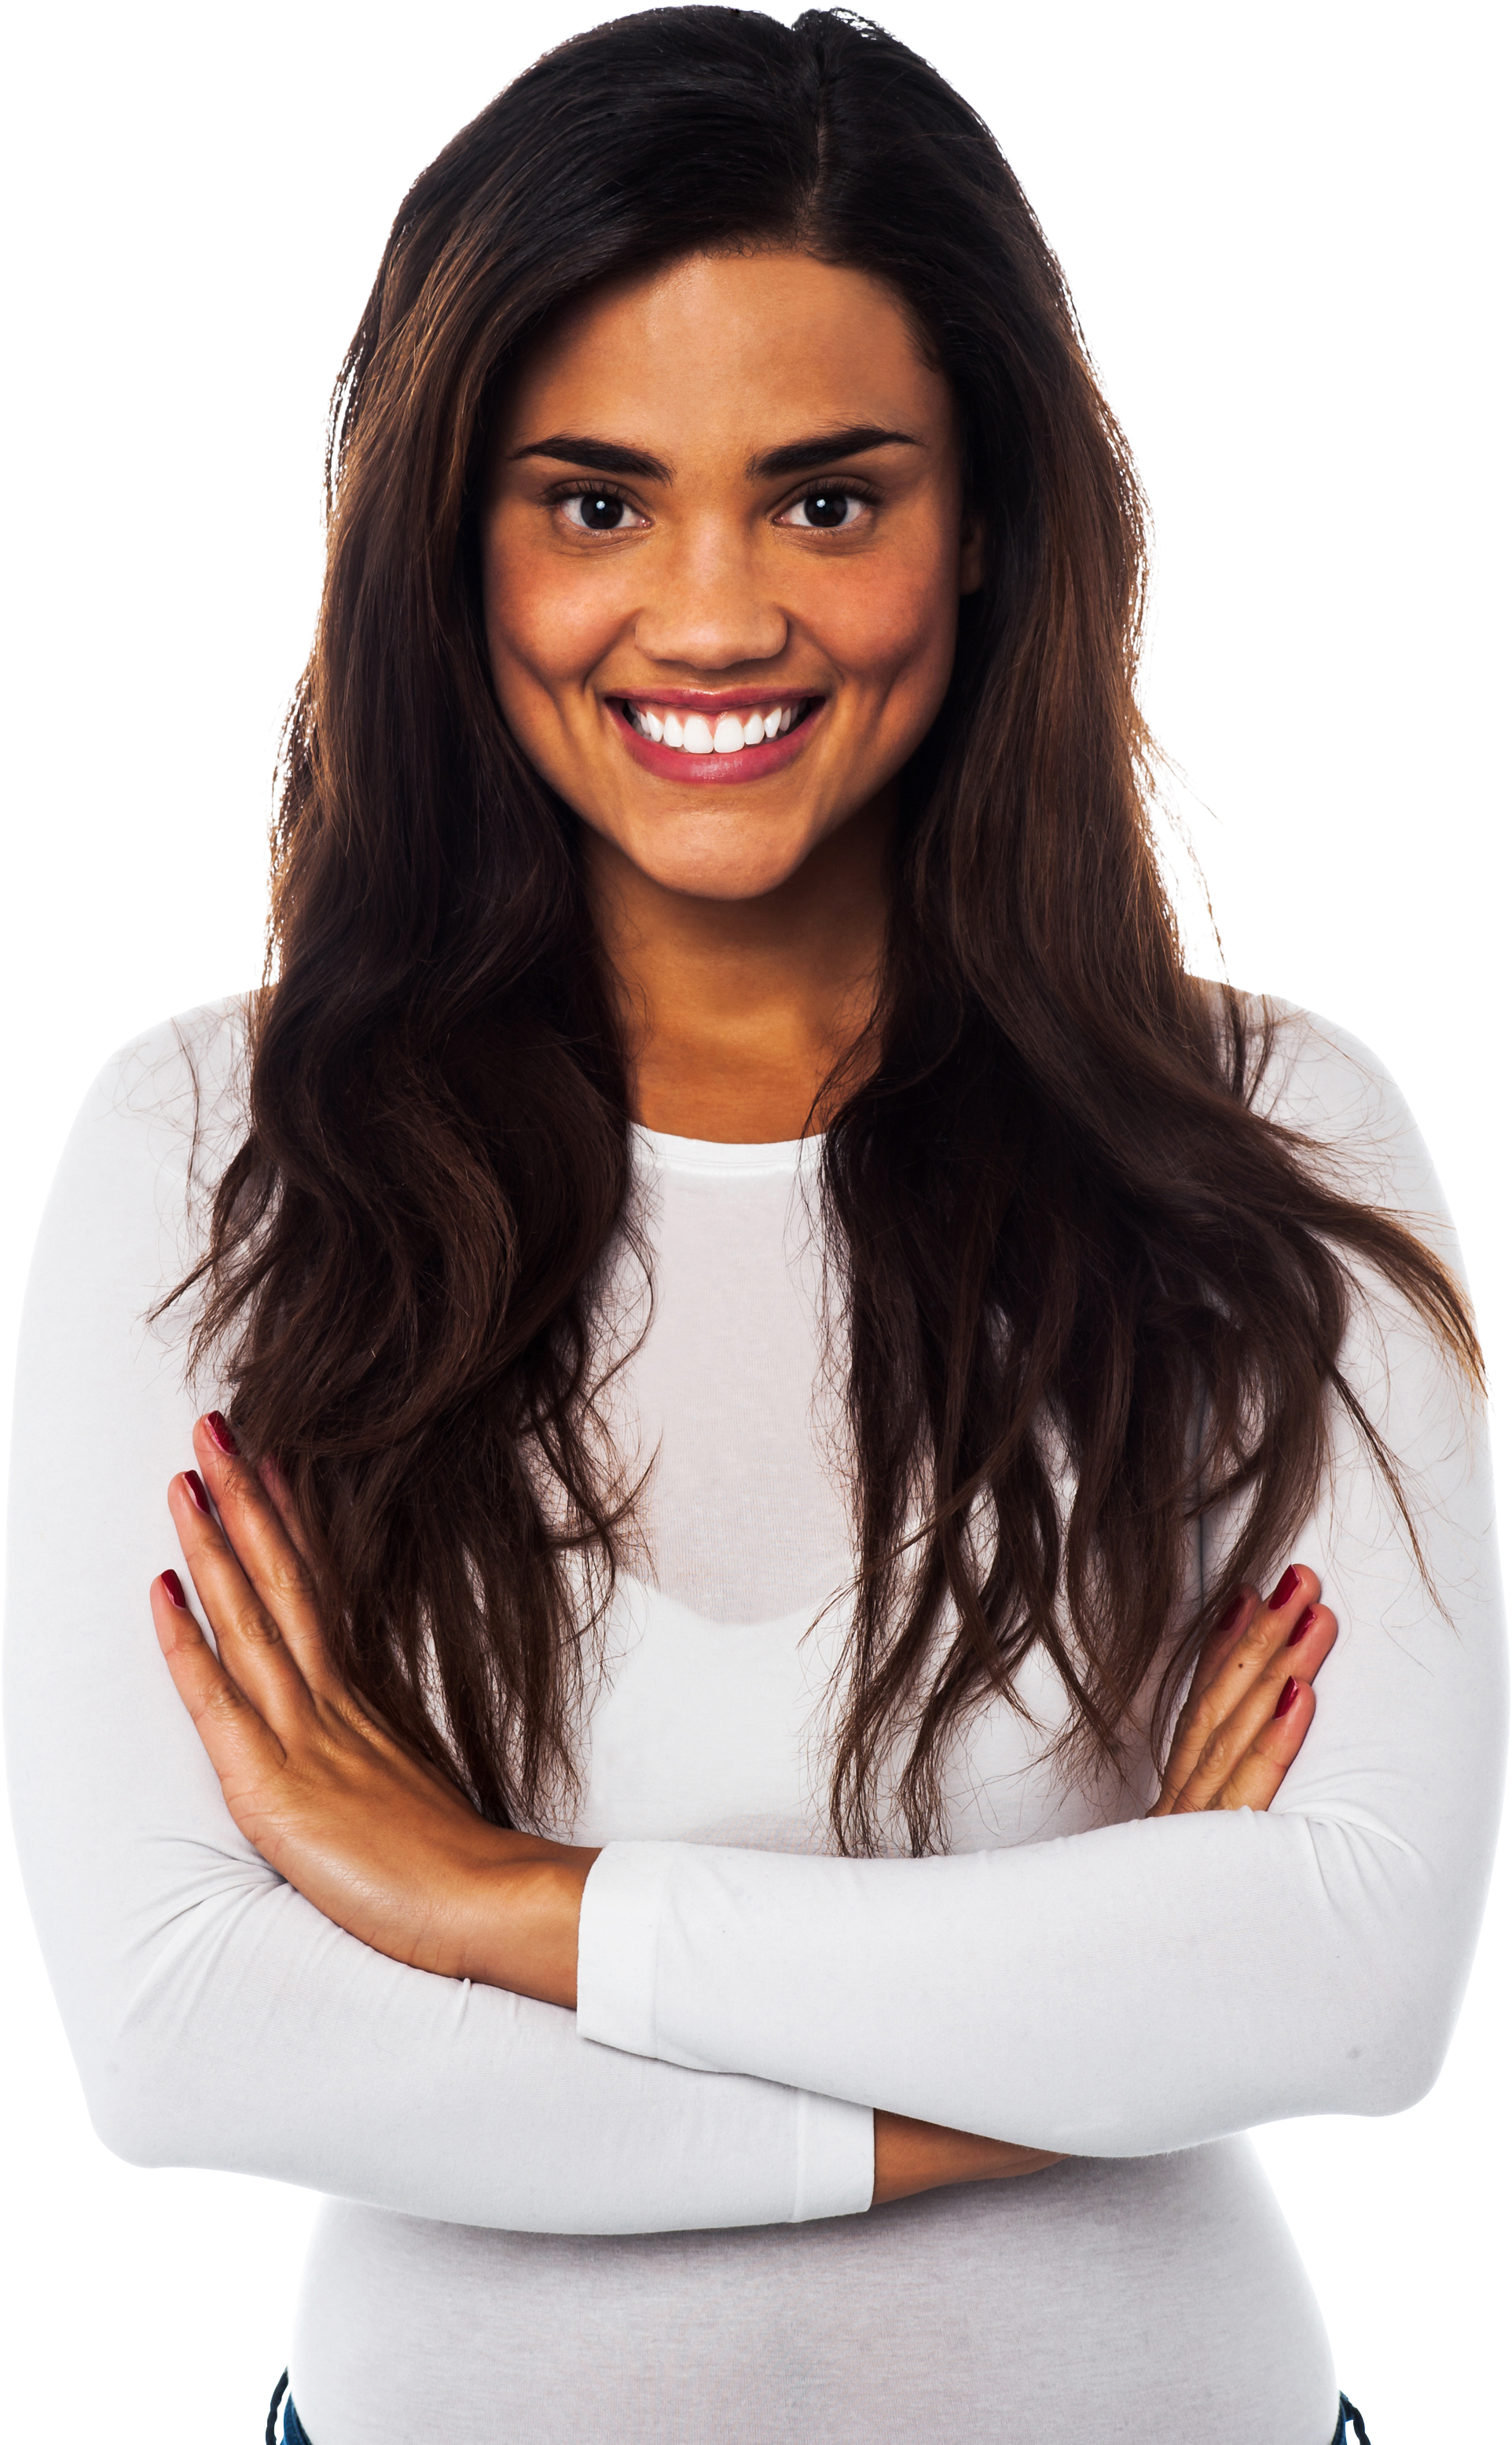 Confident Smiling Woman Crossed Arms PNG image